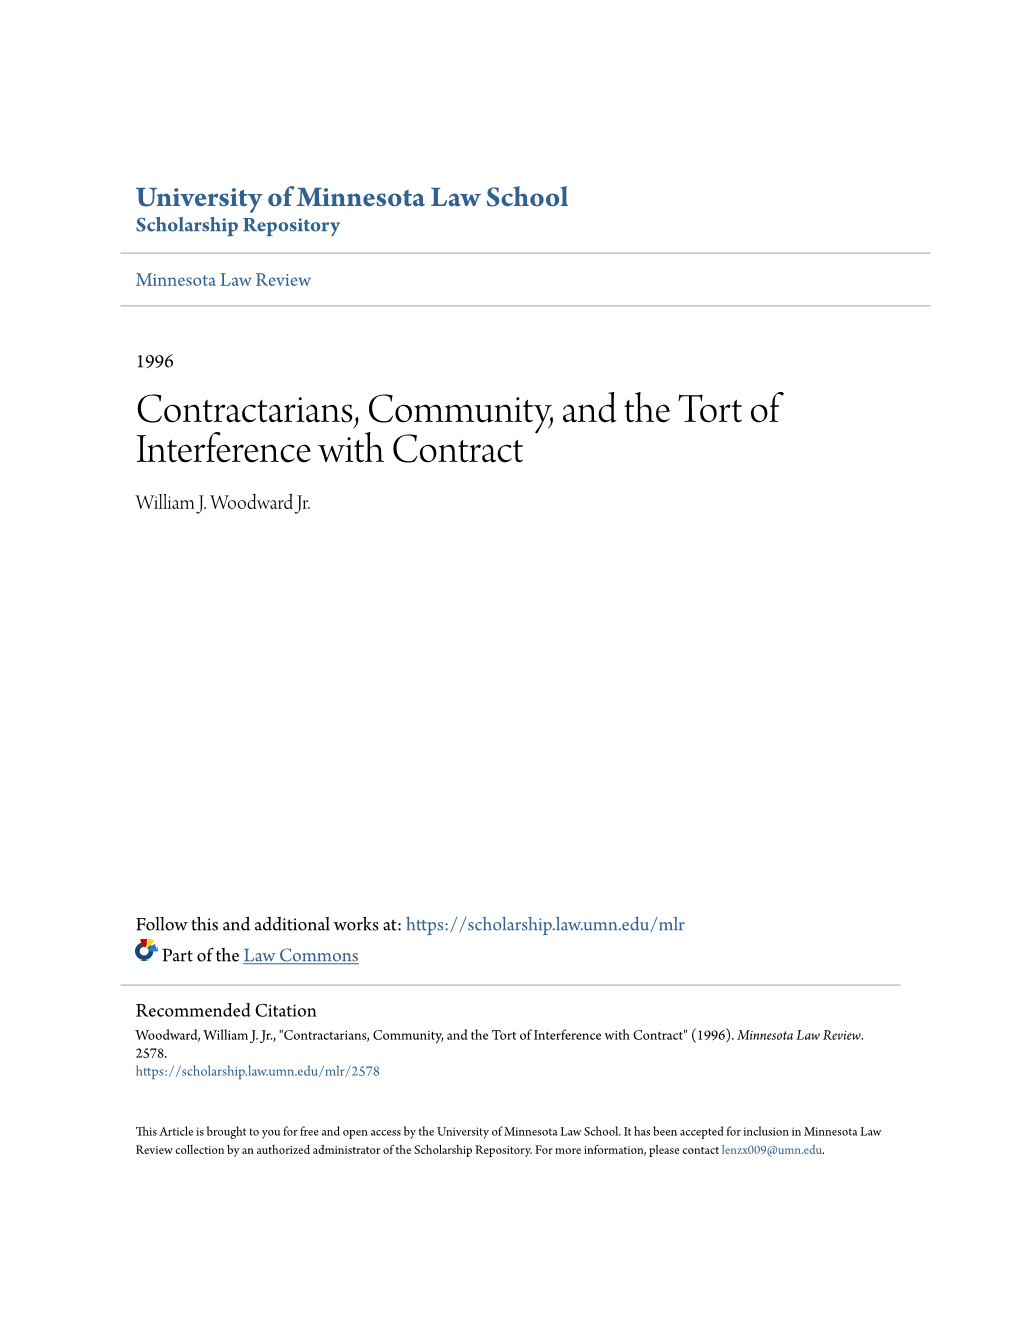 Contractarians, Community, and the Tort of Interference with Contract William J